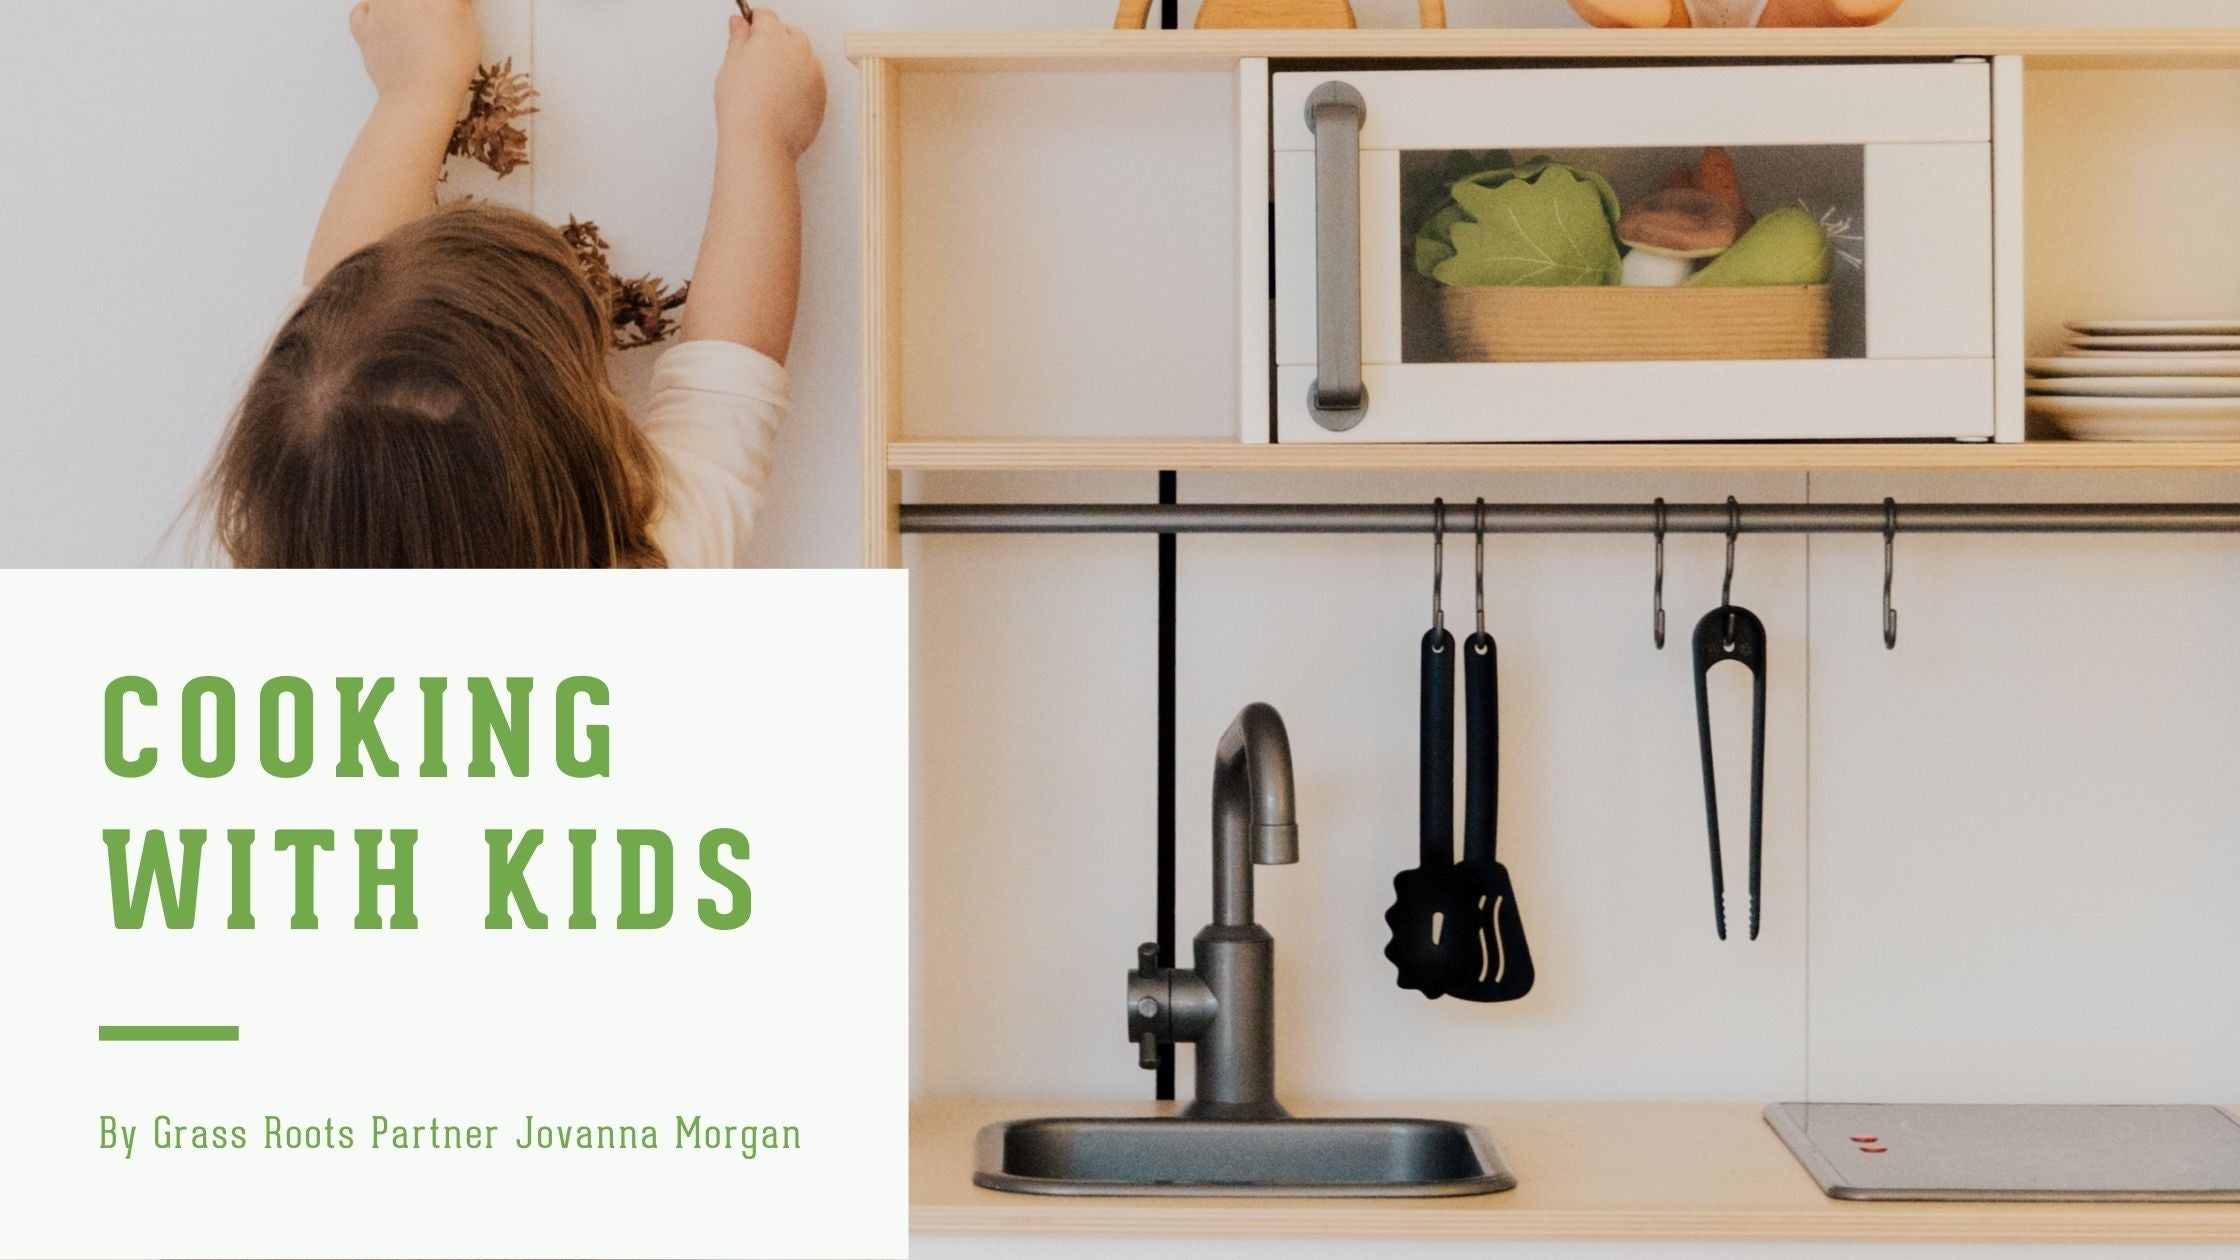 Image of a child in a play kitchen. The words "cooking with kids. By grass roots partner Jovanna Morgan" on the left side